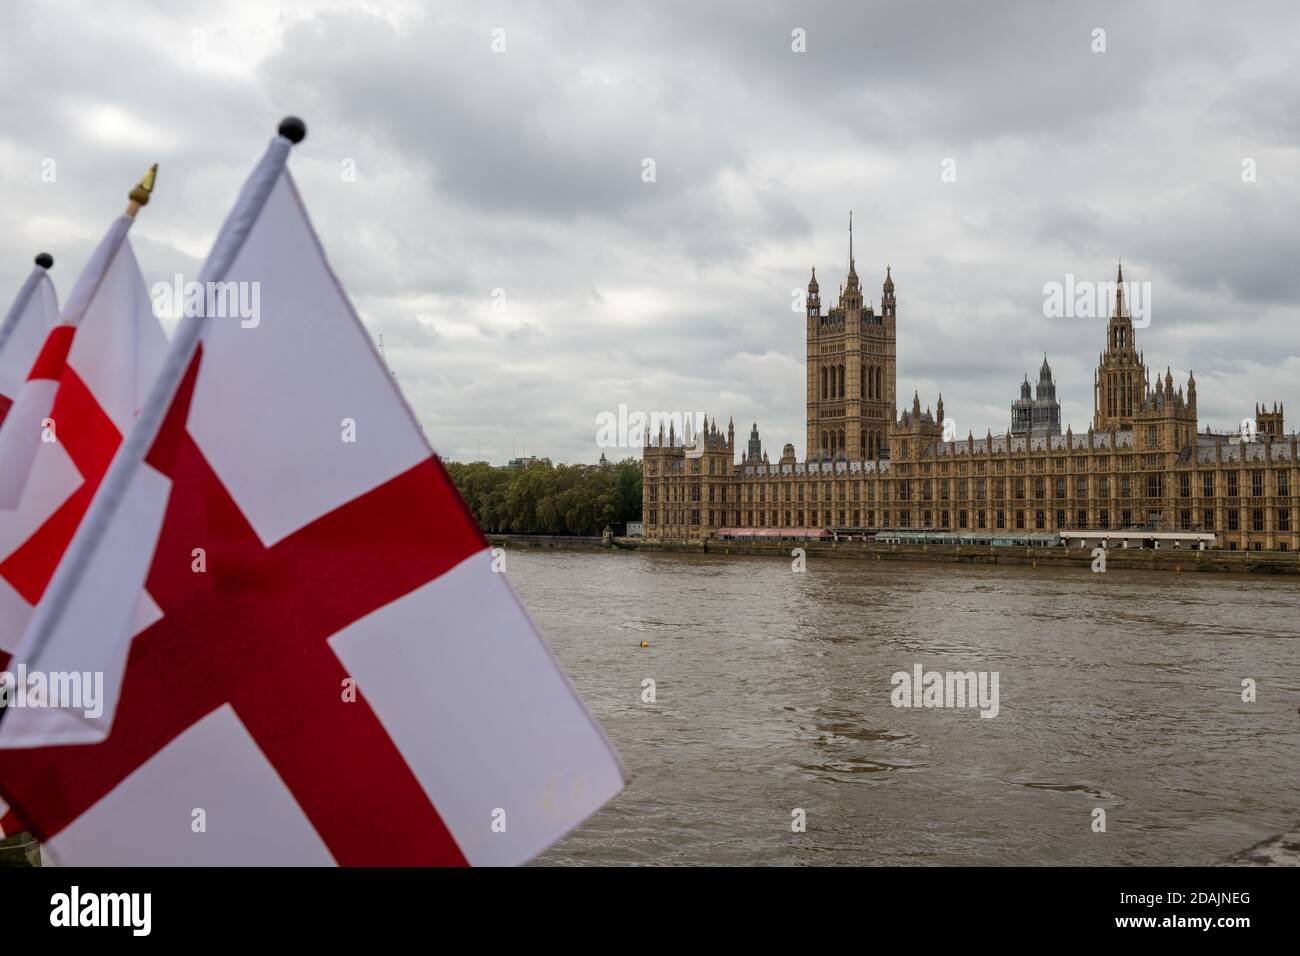 The House of Parliament with the flag of St. George in the foreground. Stock Photo